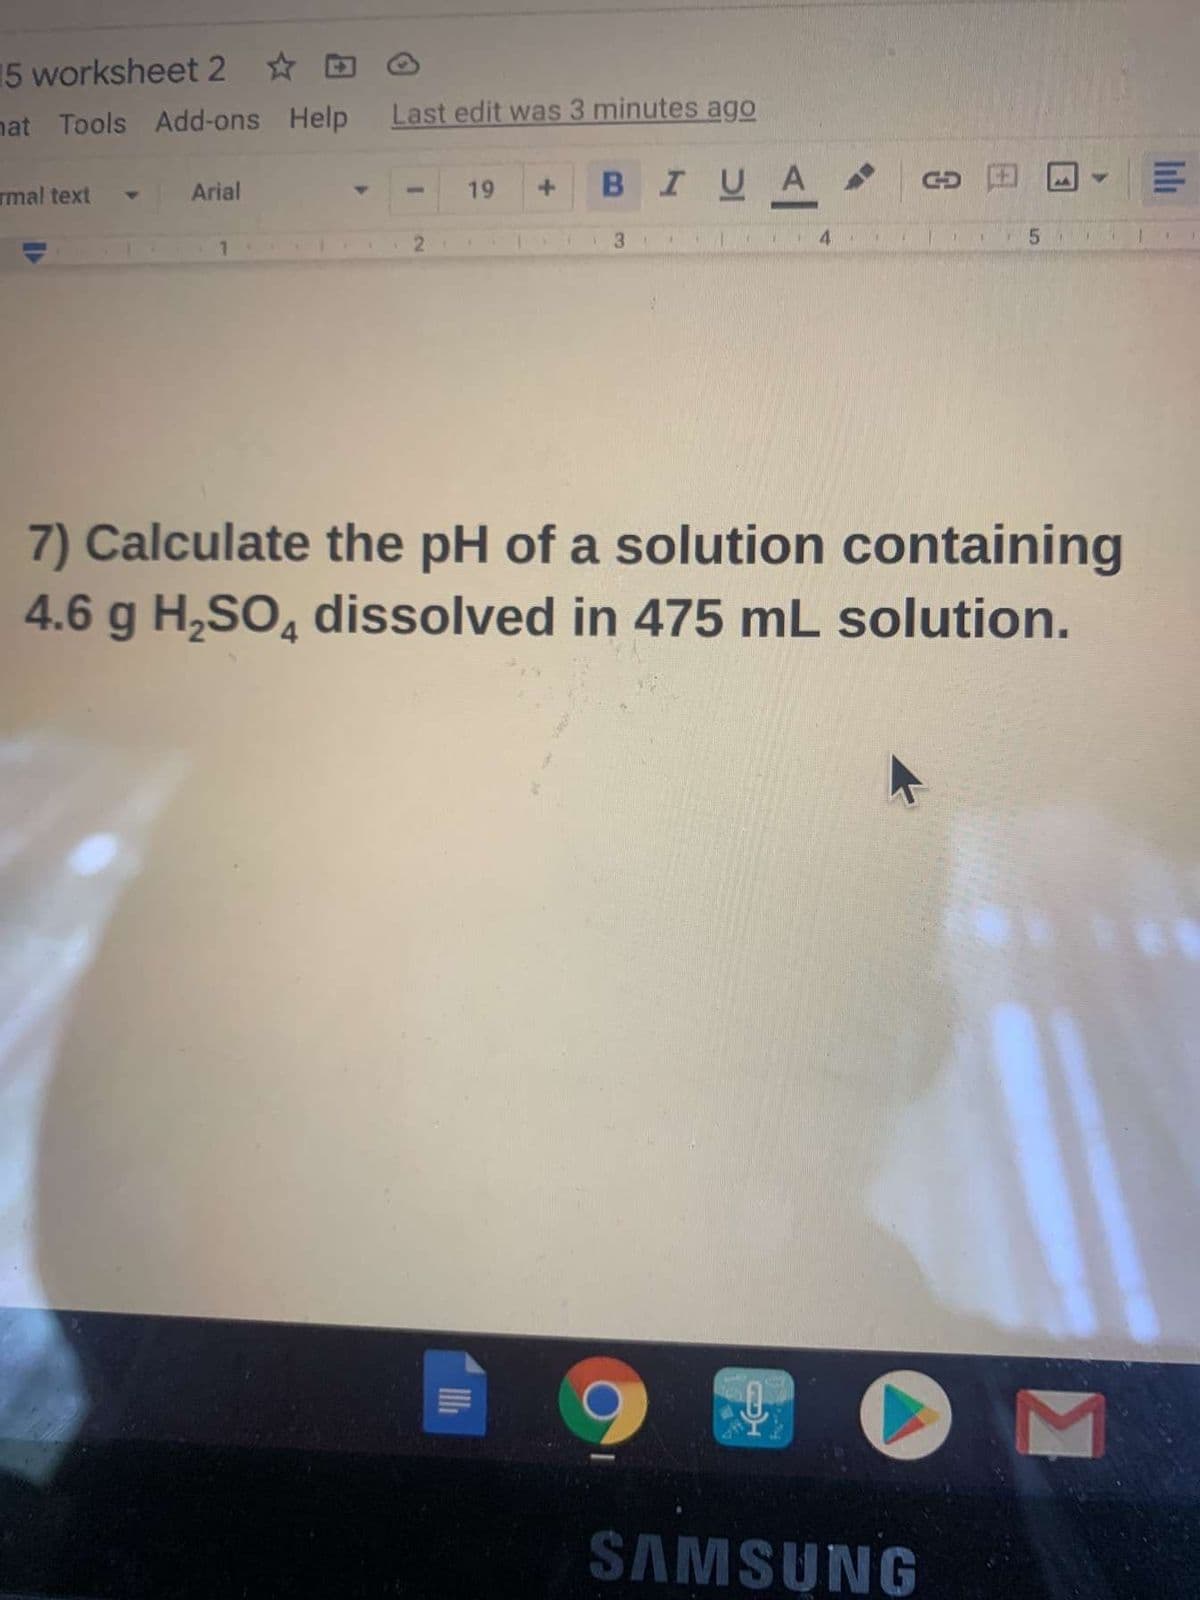 15 worksheet 2 ☆
nat Tools Add-ons Help
Last edit was 3 minutes ago
Arial
19
BIUA
rmal text
13
4.
5.
1.
7) Calculate the pH of a solution containing
4.6 g H,SO, dissolved in 475 mL solution.
SAMSUNG
